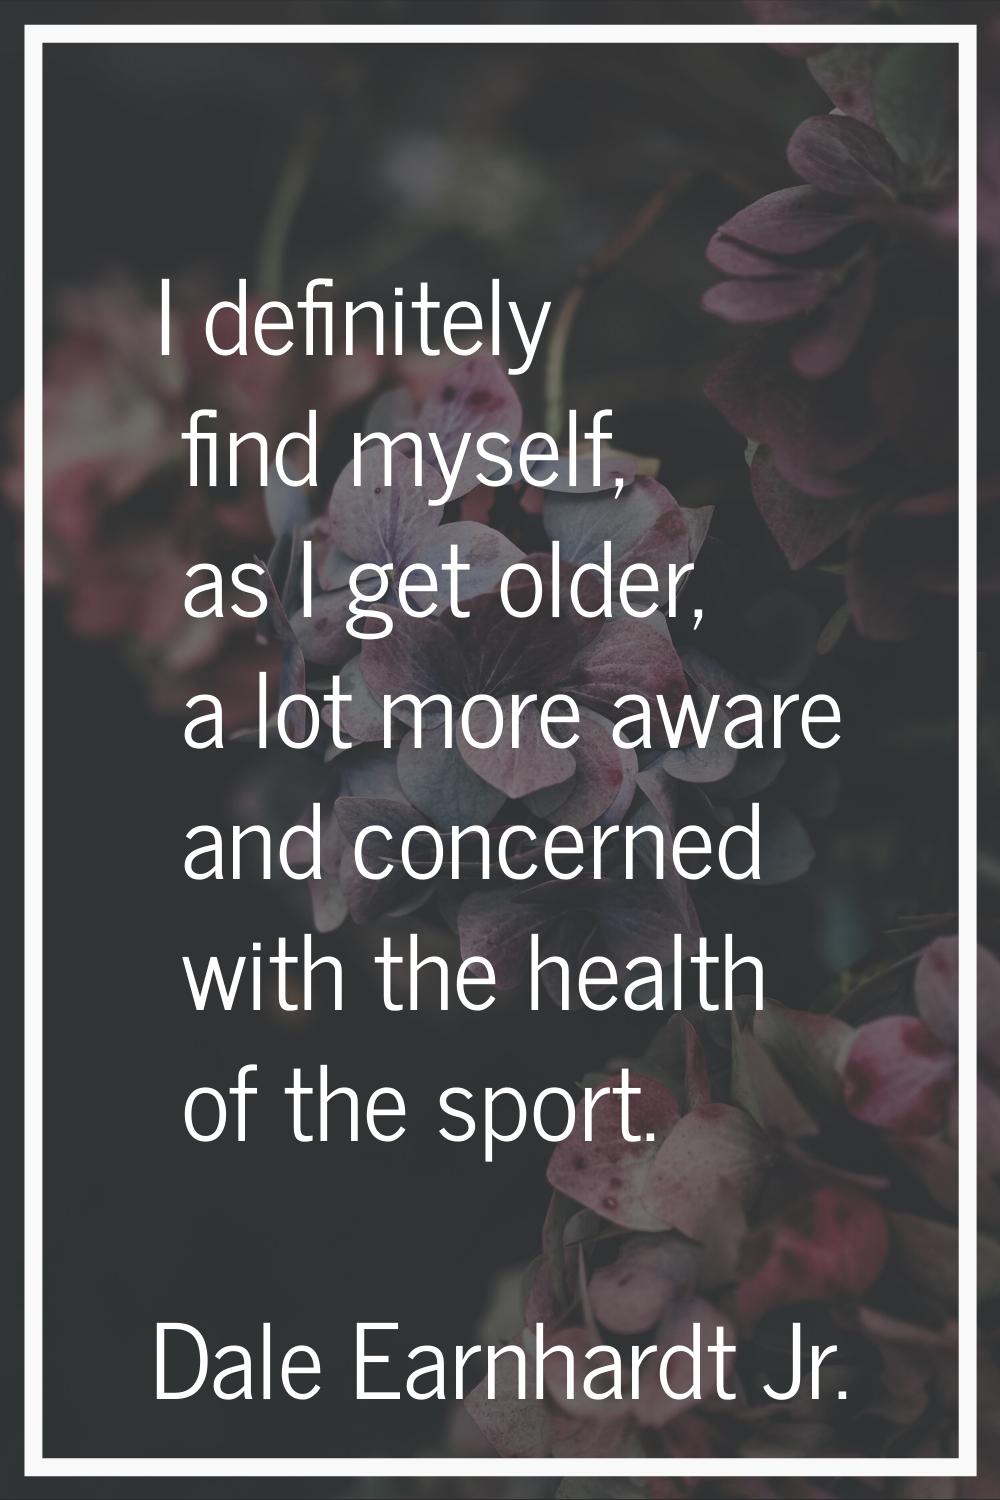 I definitely find myself, as I get older, a lot more aware and concerned with the health of the spo